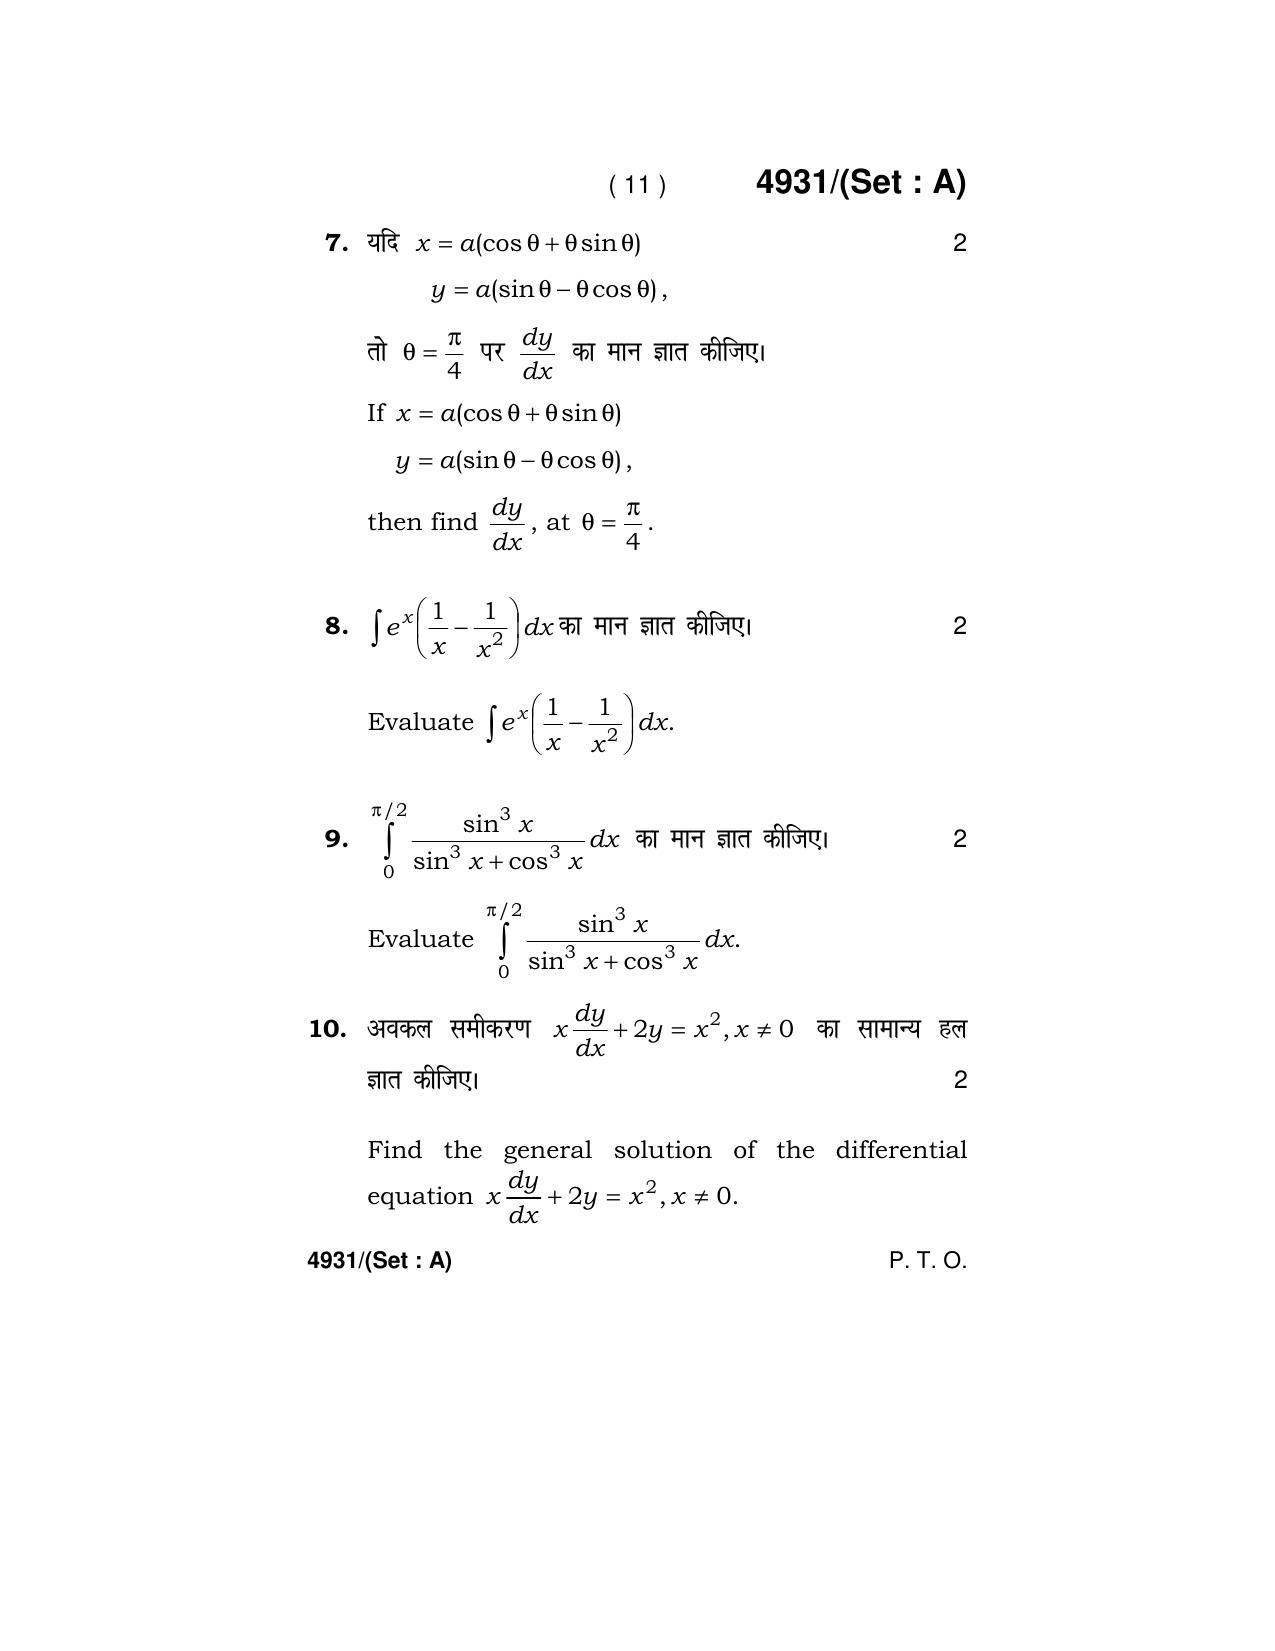 Haryana Board HBSE Class 12 Mathematics 2020 Question Paper - Page 11